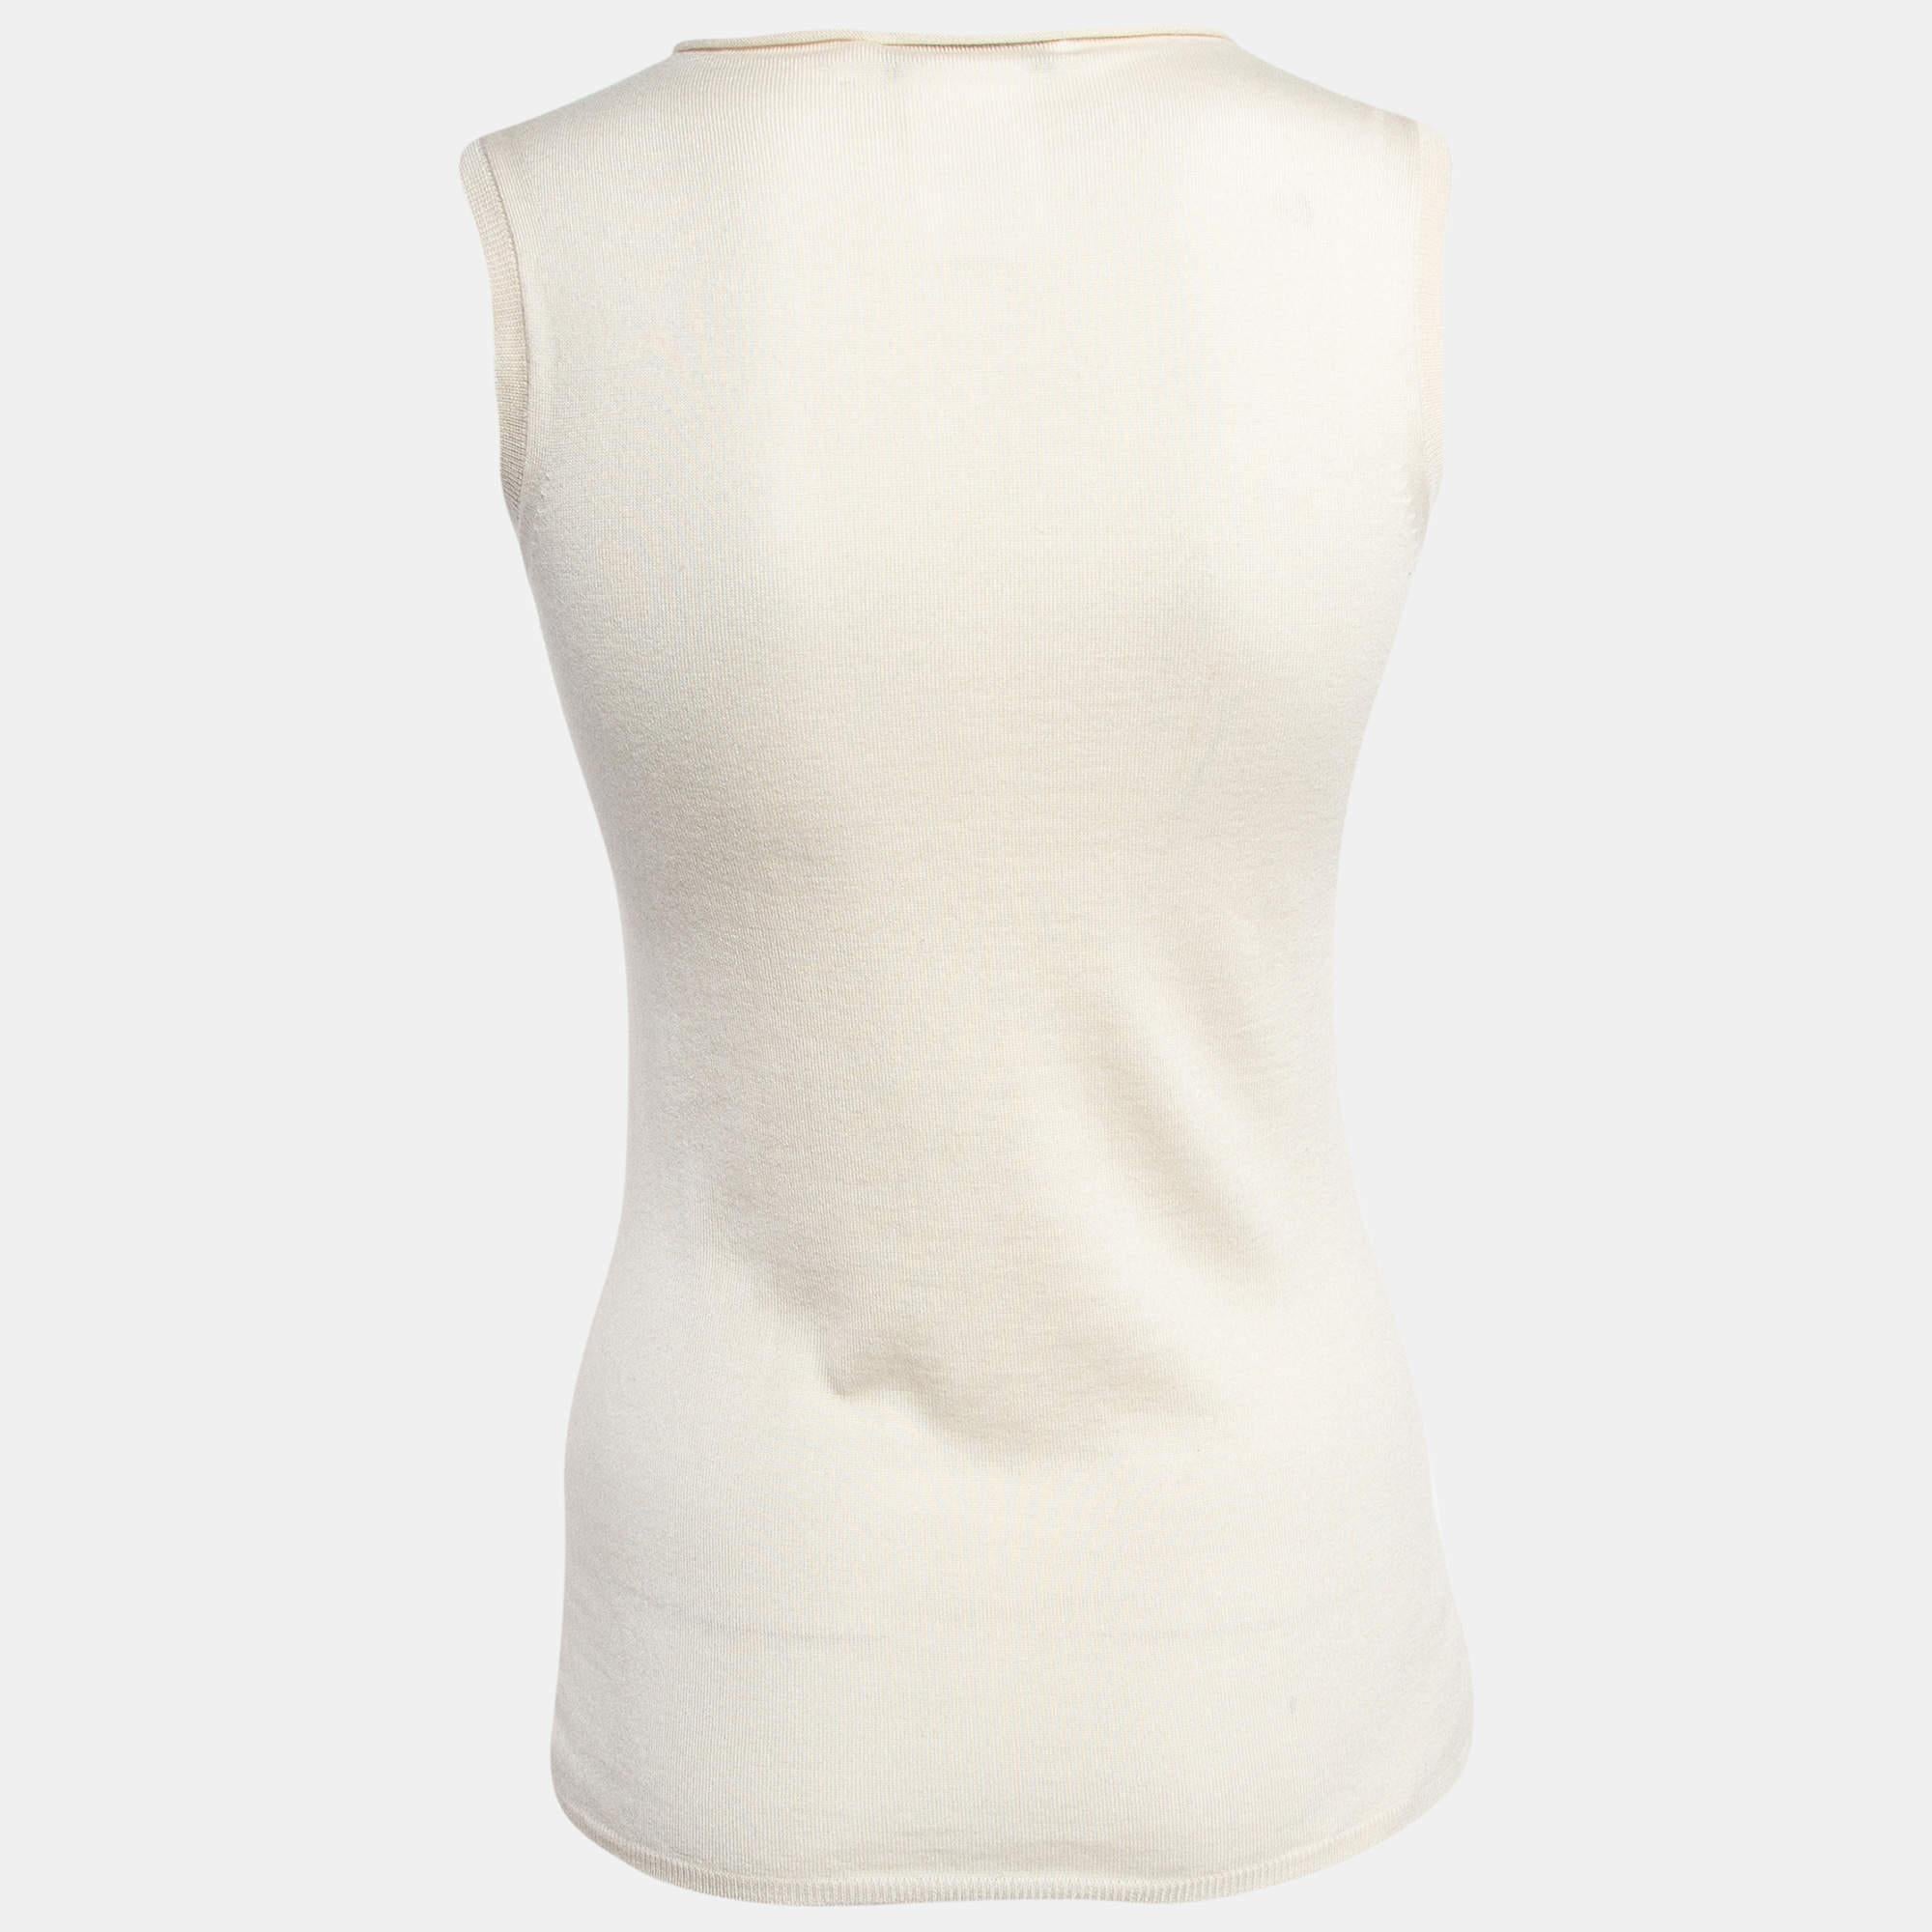 Wrap yourself in the luxurious comfort of the Christian Dior top. Crafted from sumptuously soft cashmere, this sleeveless top features a sophisticated rib knit design and a raw edge neckline, exuding effortless style and understated elegance for any